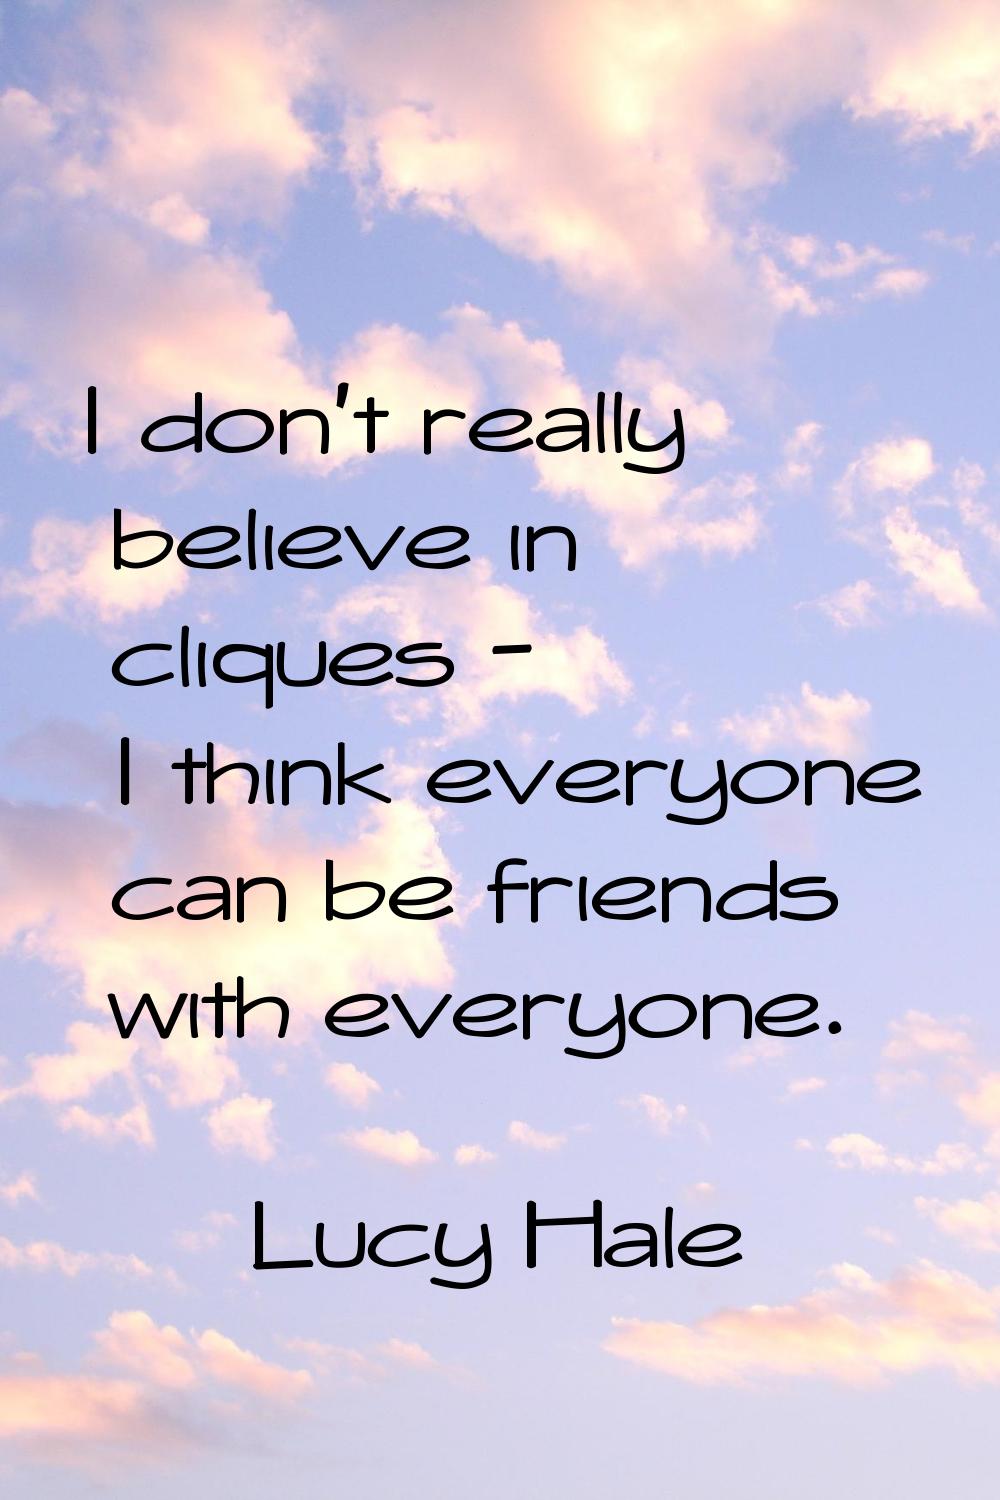 I don't really believe in cliques - I think everyone can be friends with everyone.